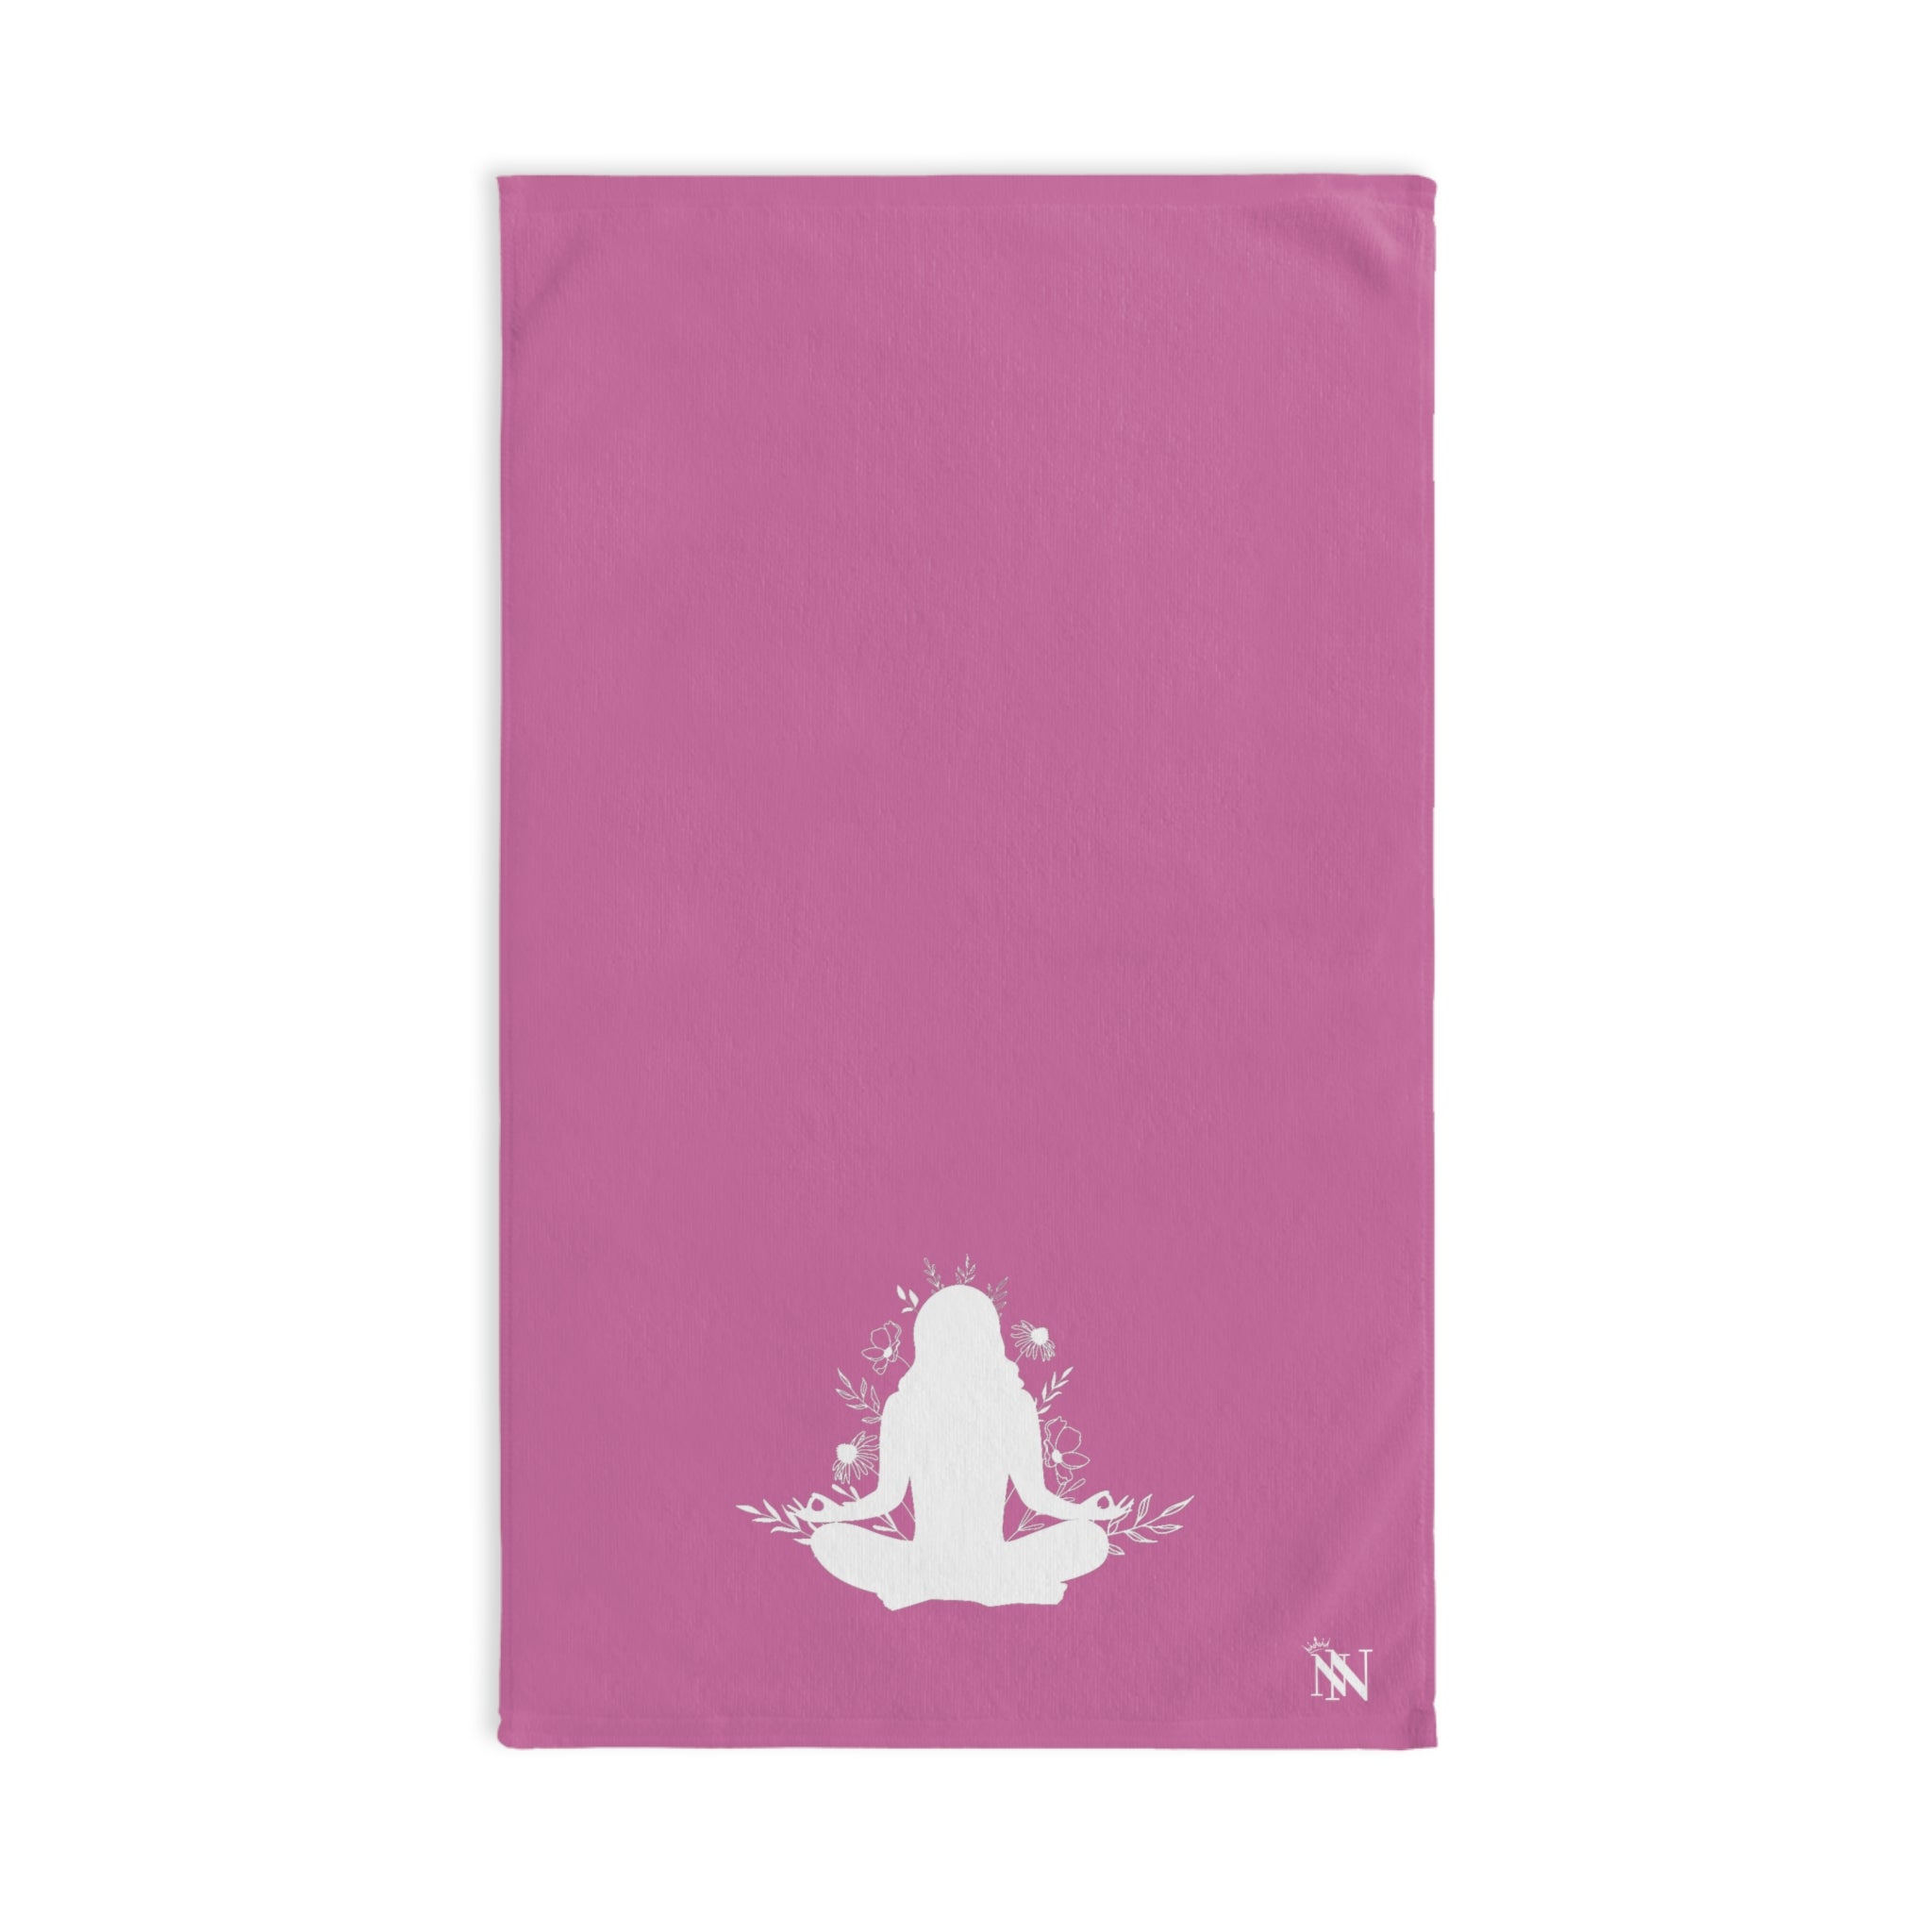 Yoga Seated Med Pink | Novelty Gifts for Boyfriend, Funny Towel Romantic Gift for Wedding Couple Fiance First Year Anniversary Valentines, Party Gag Gifts, Joke Humor Cloth for Husband Men BF NECTAR NAPKINS